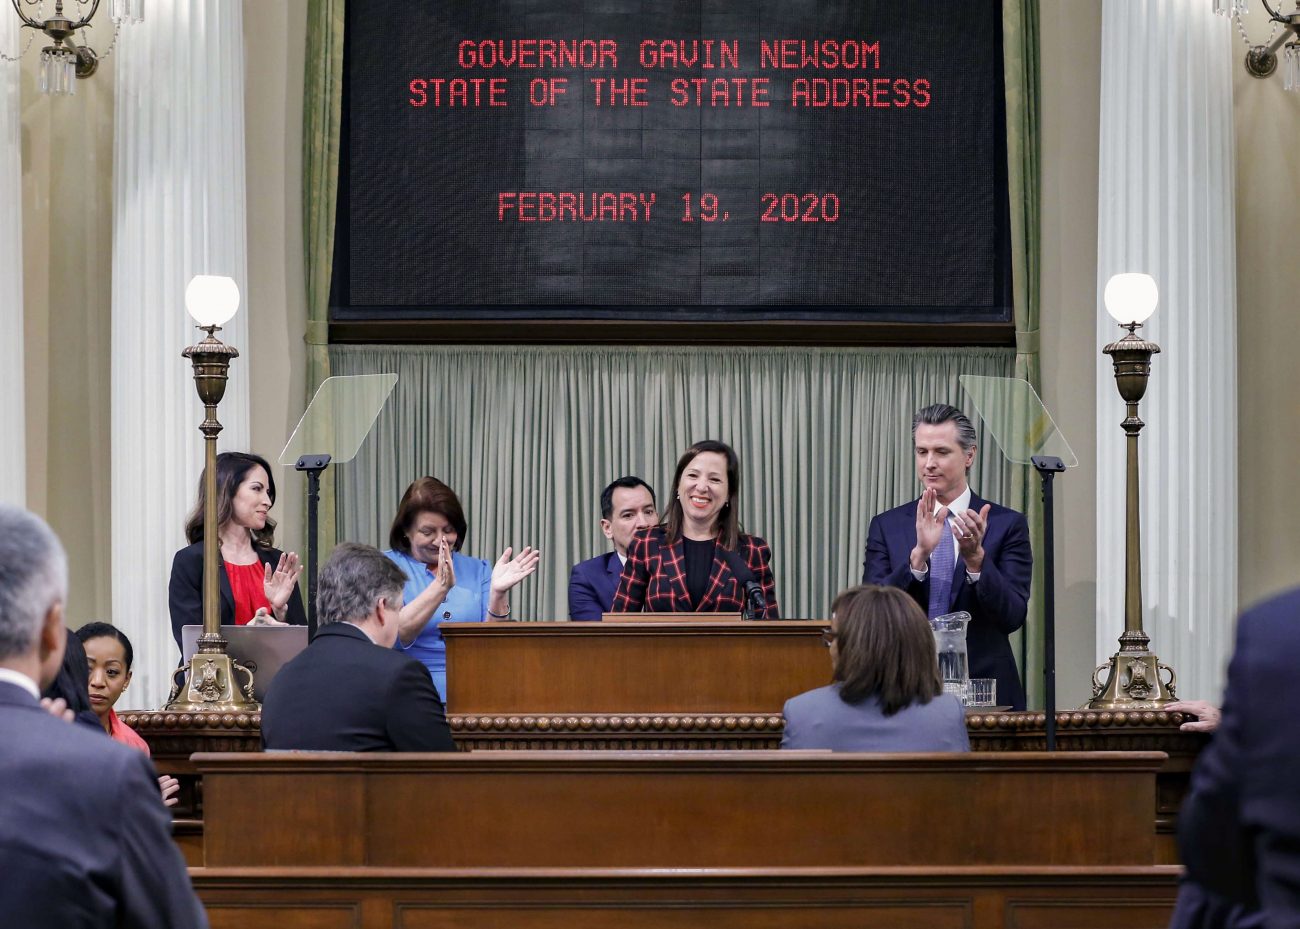 Introduction of Governor Gavin Newsom at the State of the State 2020